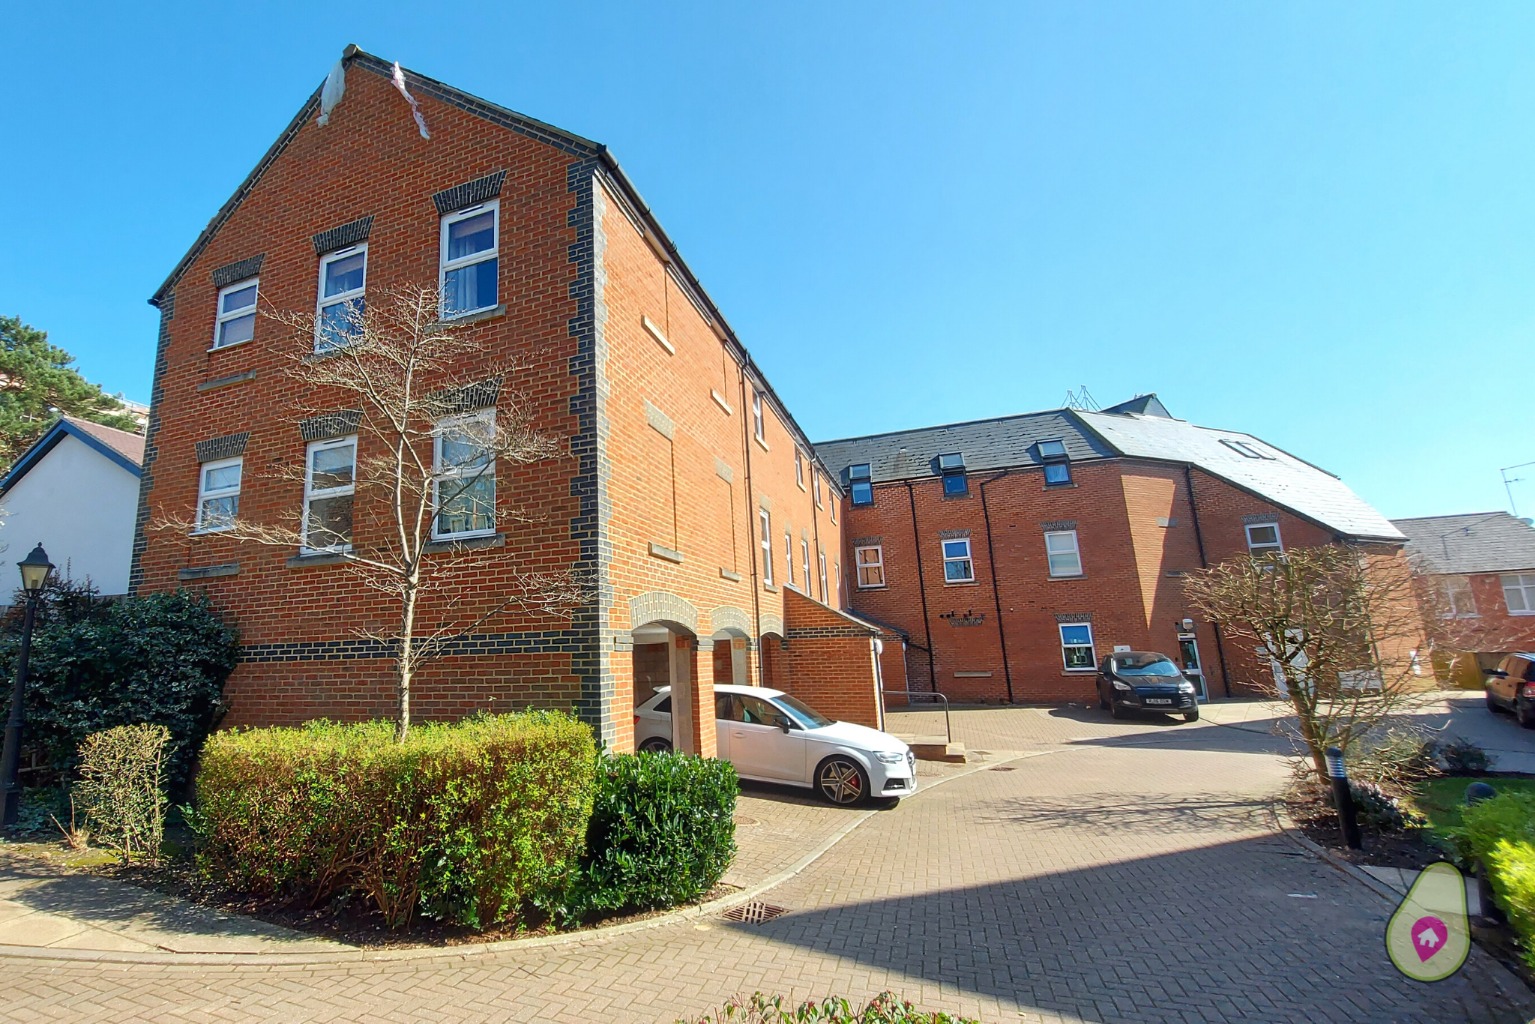 This is one of the best apartments we have had! This is a large, bright property which is well located just off of Crowthorne high Street and would make a great buy for the next owner as its ready to move straight into. It also has the benefit of being offered with no chain.